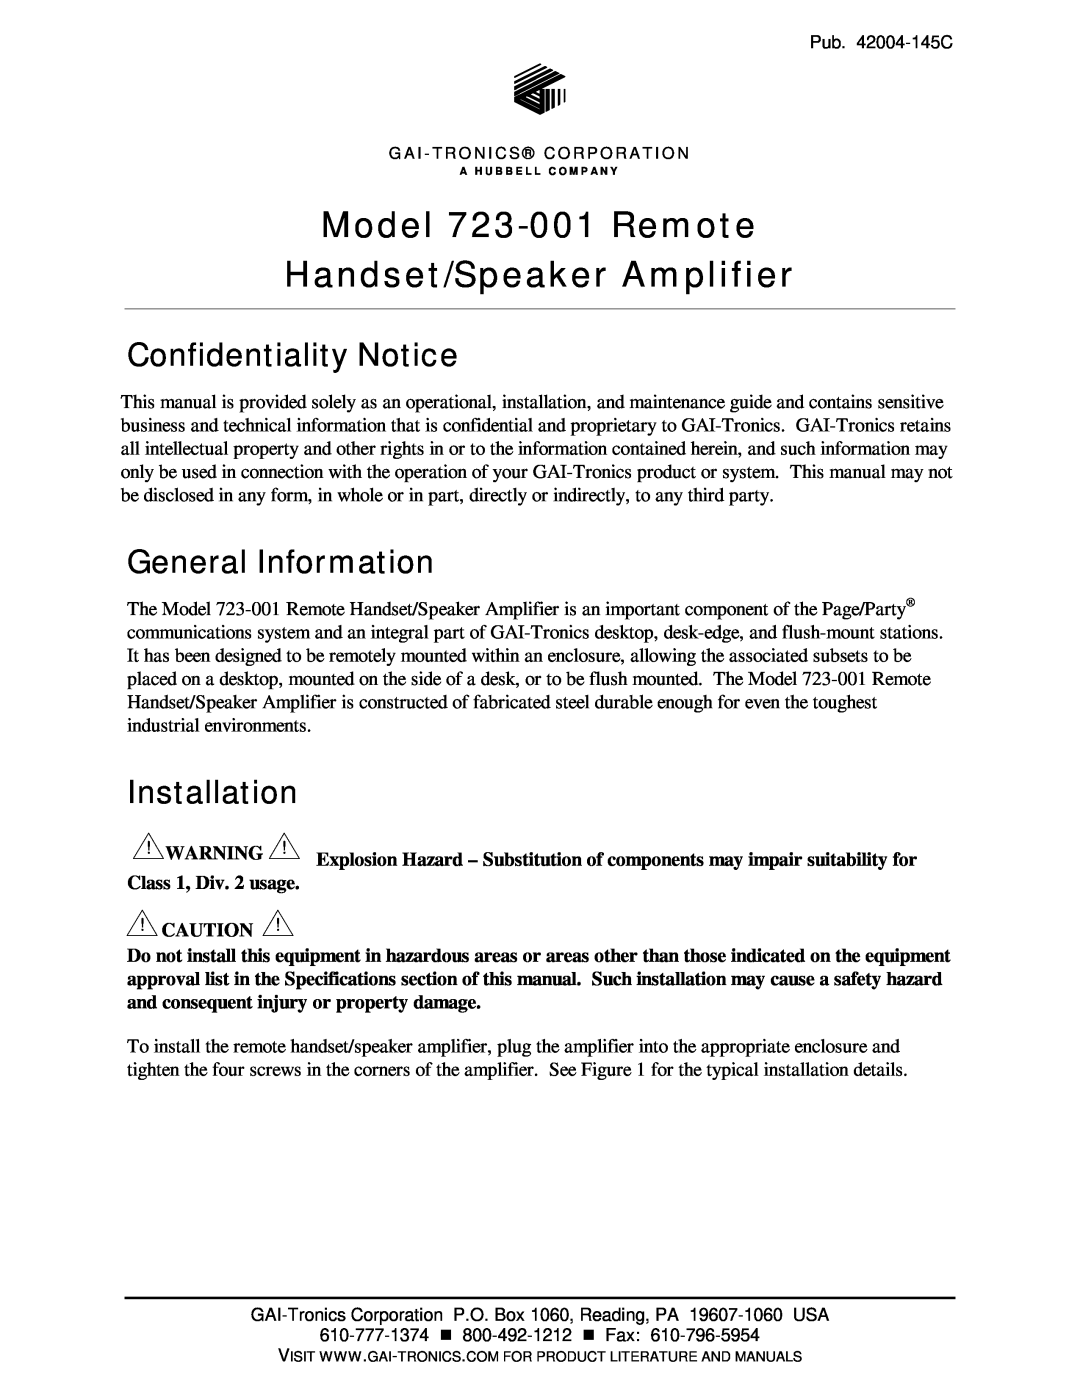 Hubbell 723-001 specifications Confidentiality Notice, General Information, Installation, Class 1, Div. 2 usage 